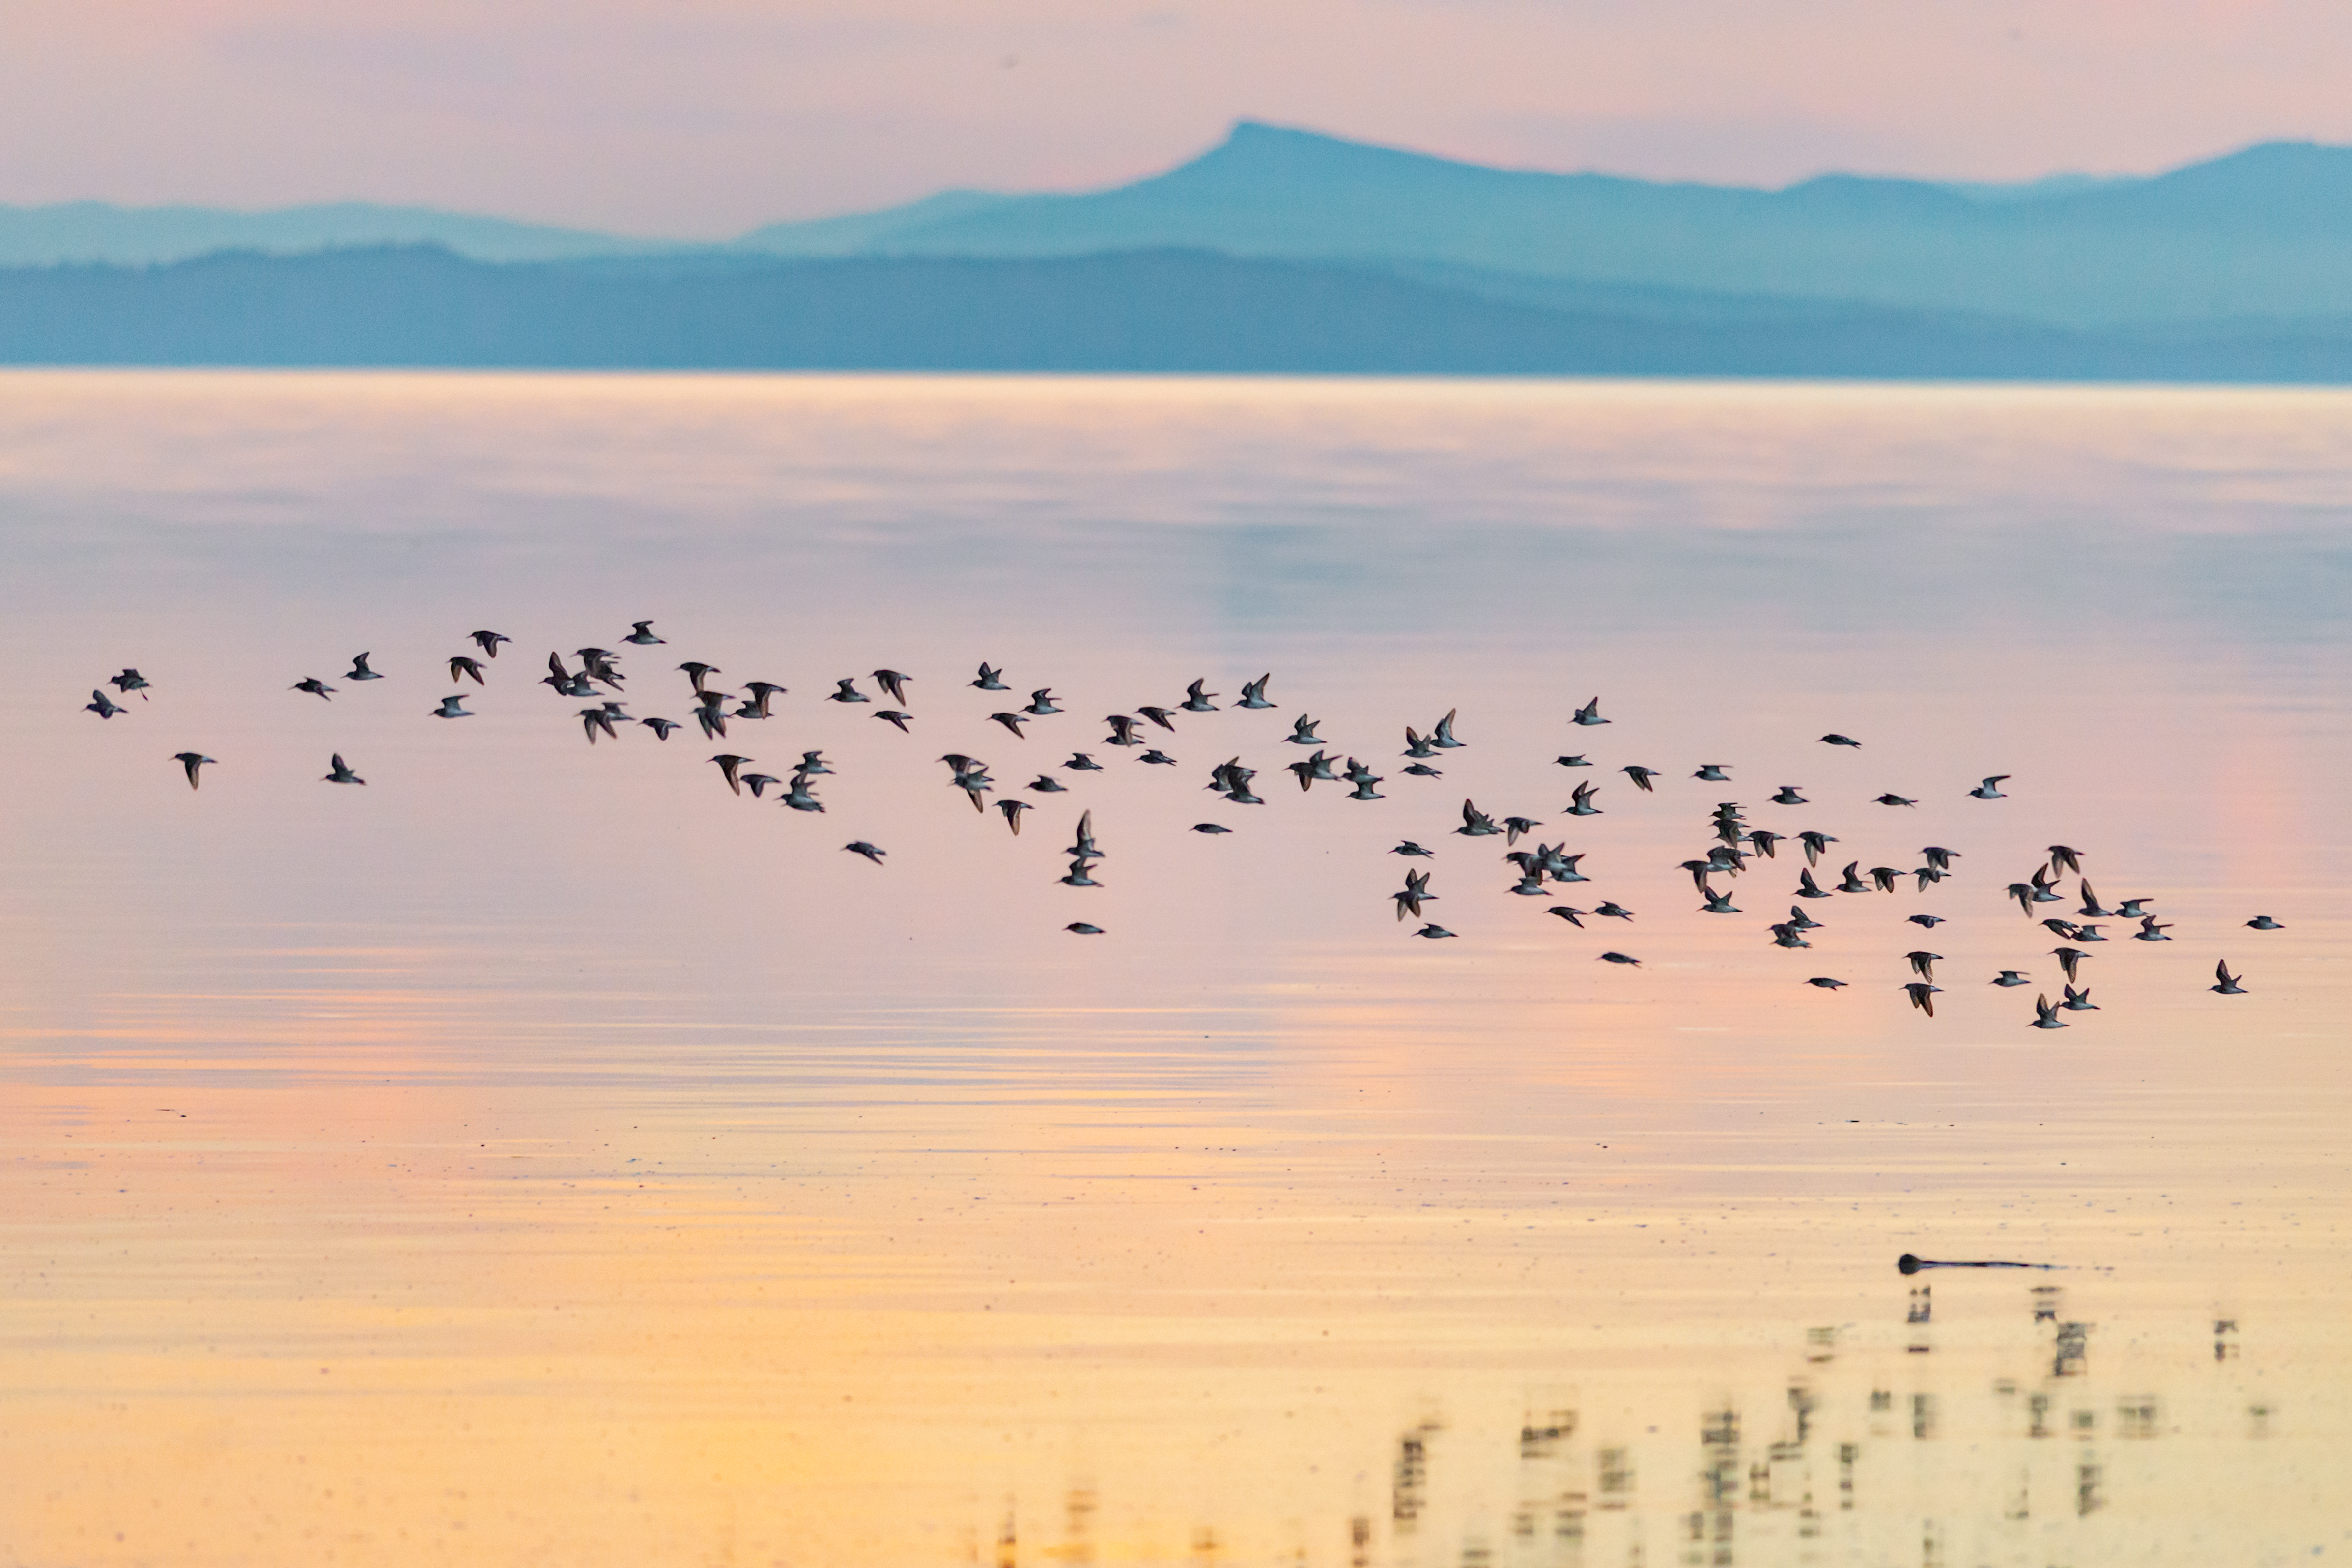 Migrating birds, taken by Kevin Young